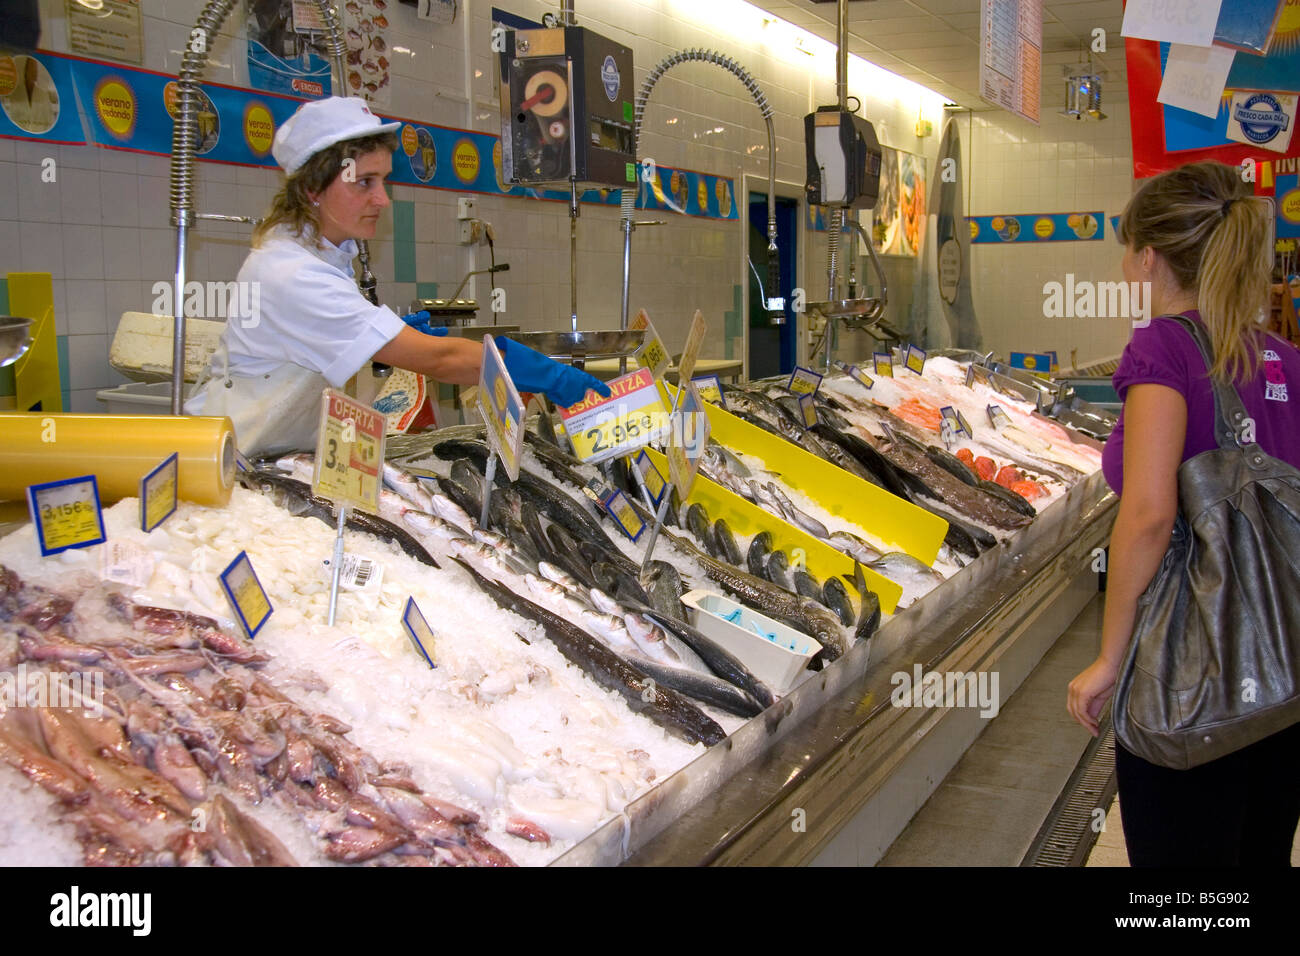 Fish market inside a supermarket in the town of Guernica in the province of Biscay Basque Country Northern Spain Stock Photo